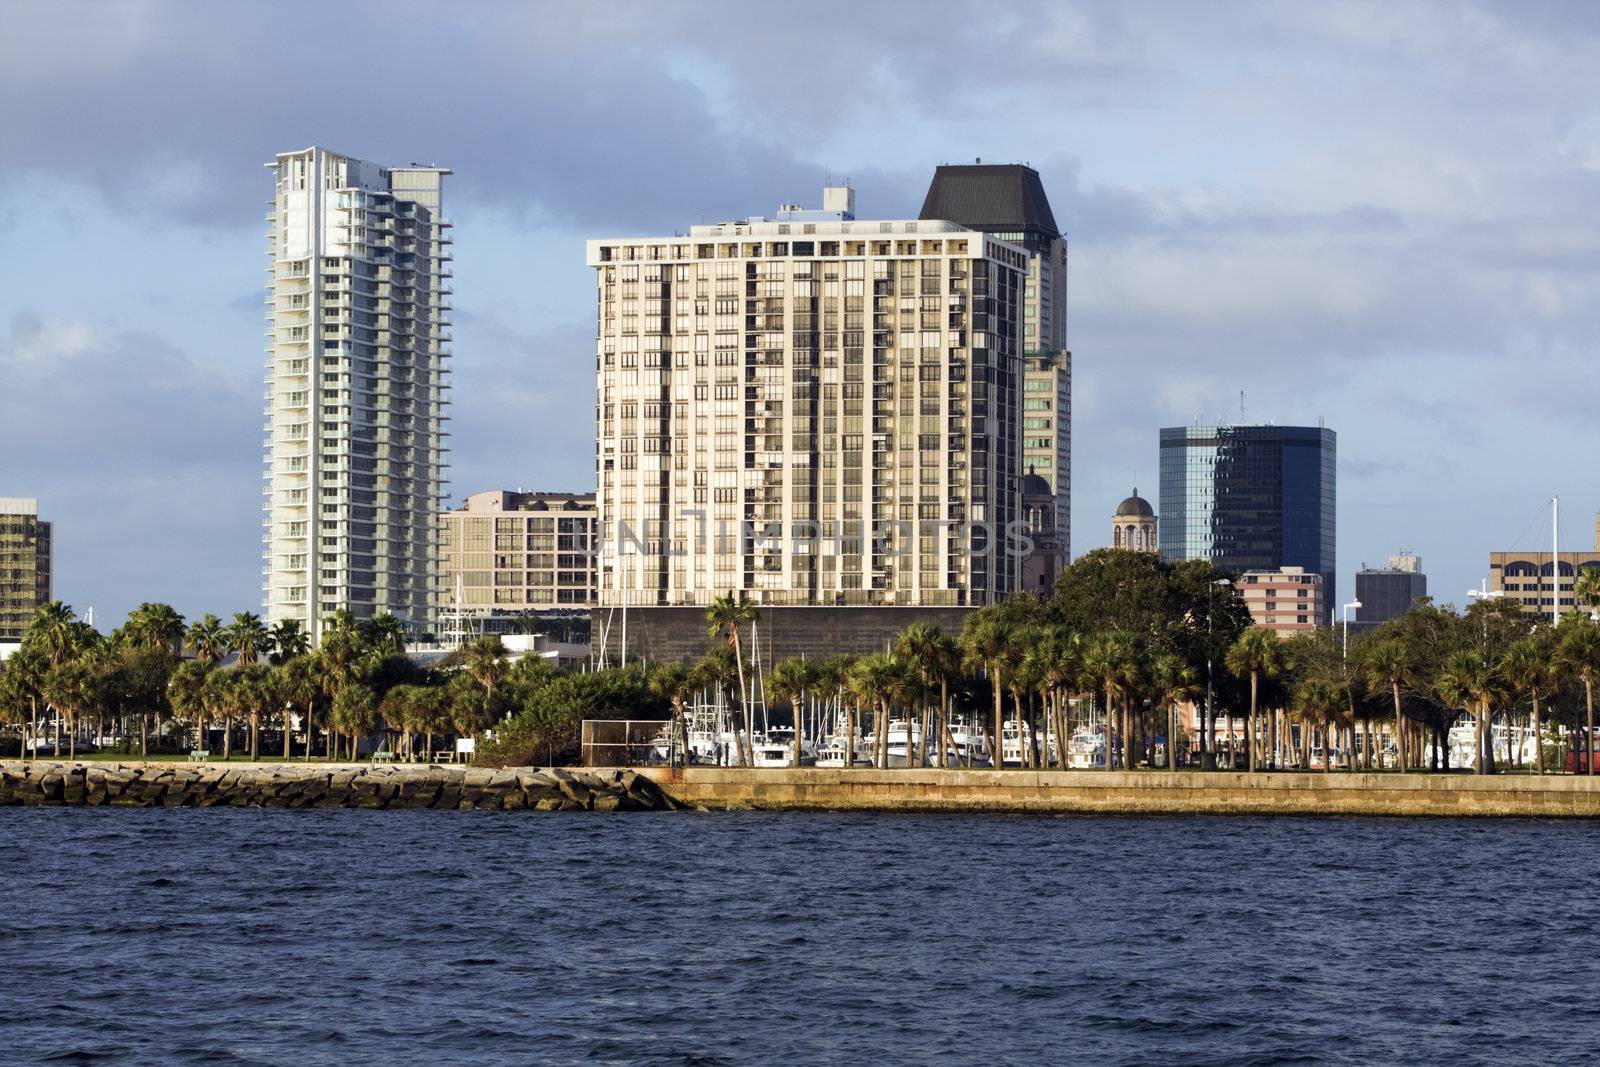 St. Petersburg, Florida - apartments buildings by the water.